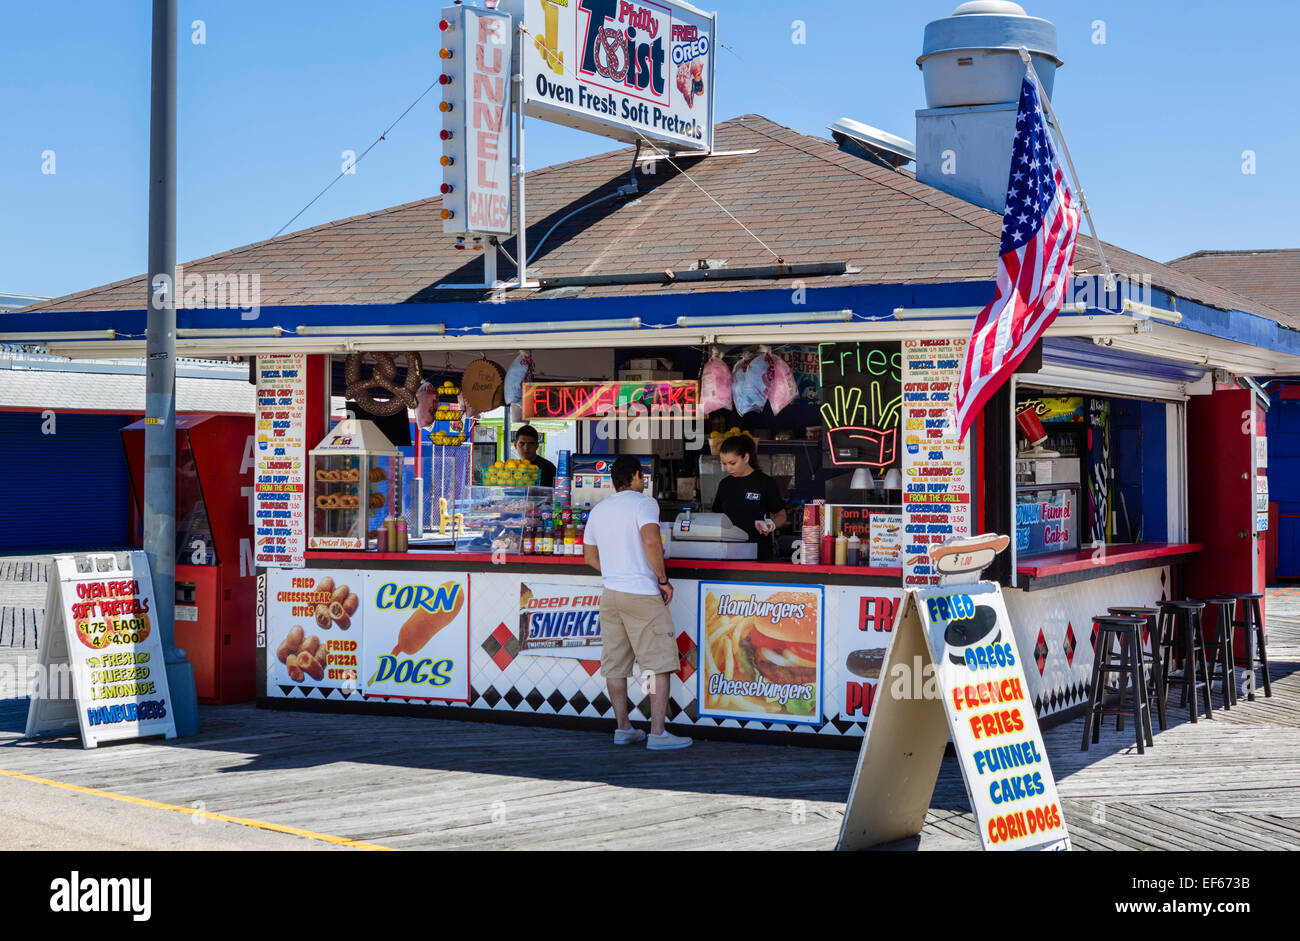 Stand selling funnel cake, pretzels, fries, corn dogs etc. on the boardwalk in North Wildwood, New Jersey, USA Stock Photo